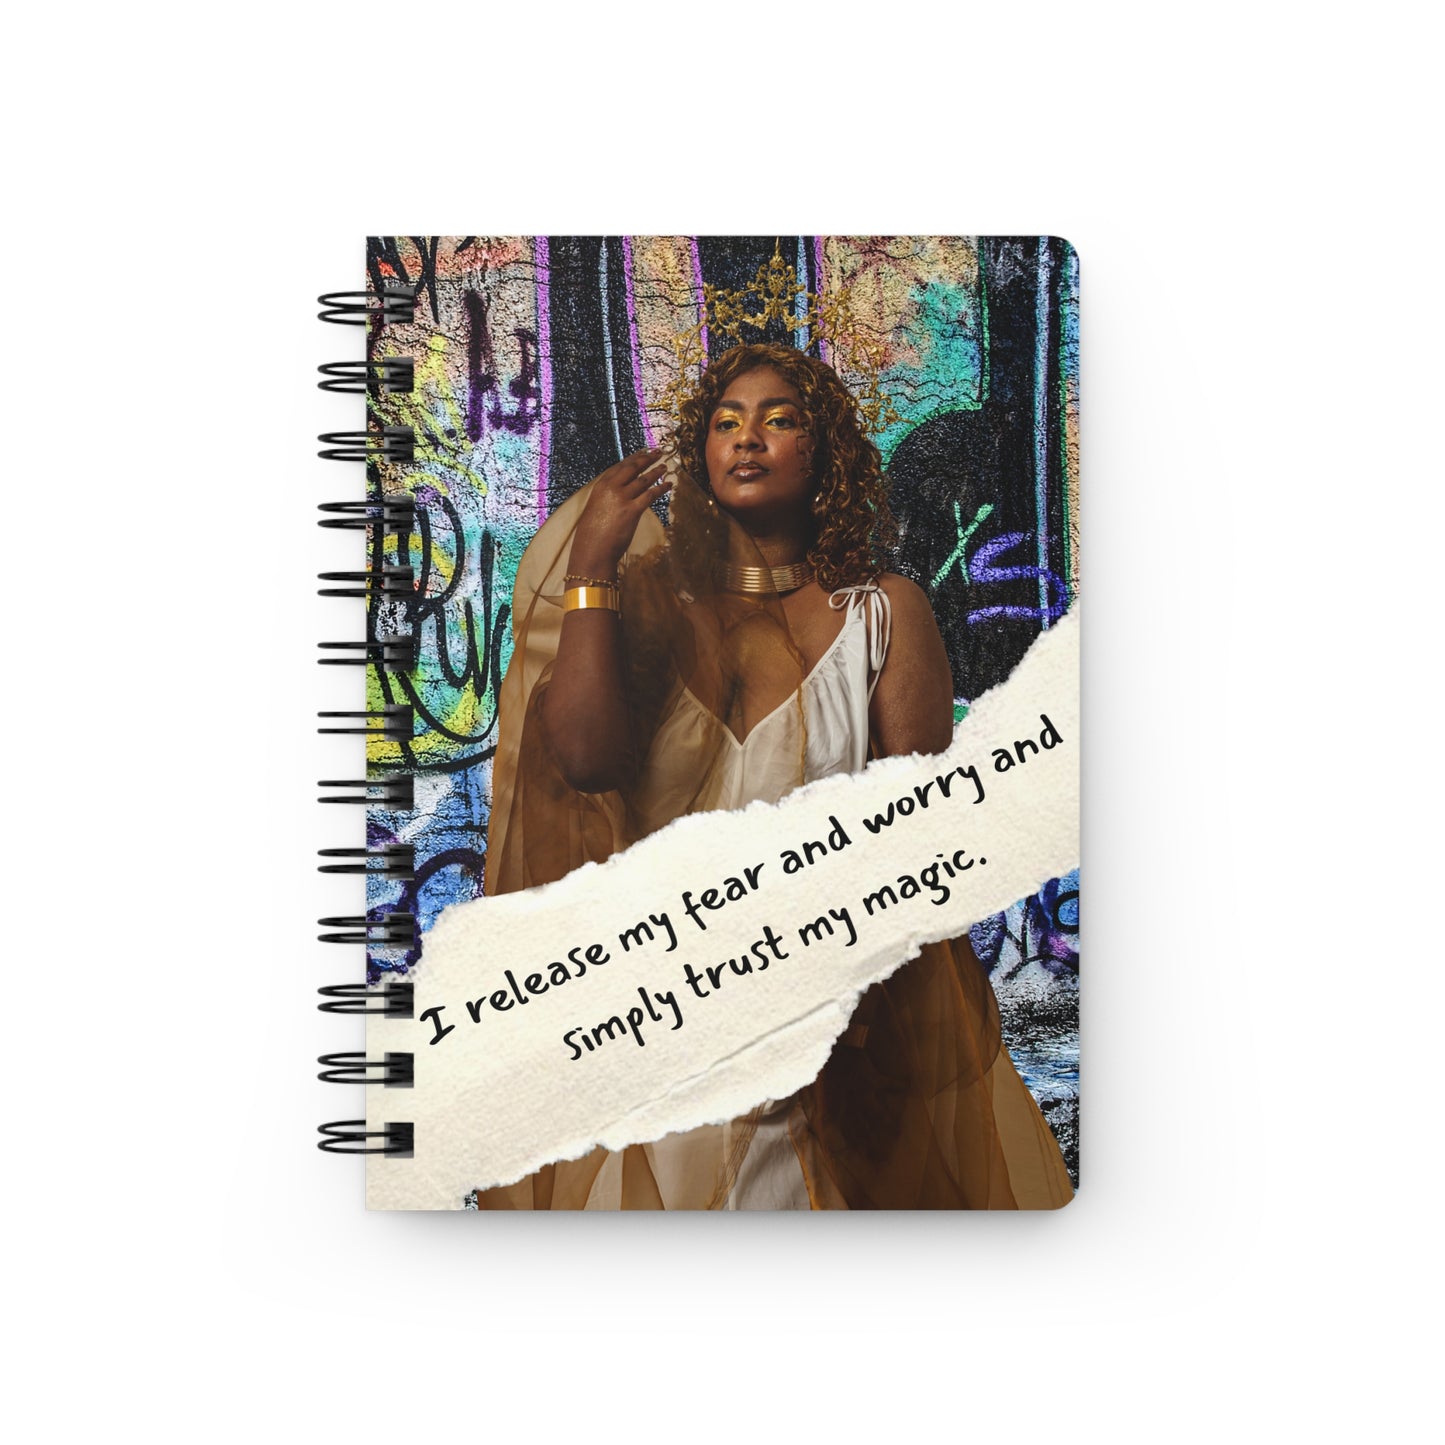 A Trust Your Magic "Spellbook" with a picture of a woman and a quote.